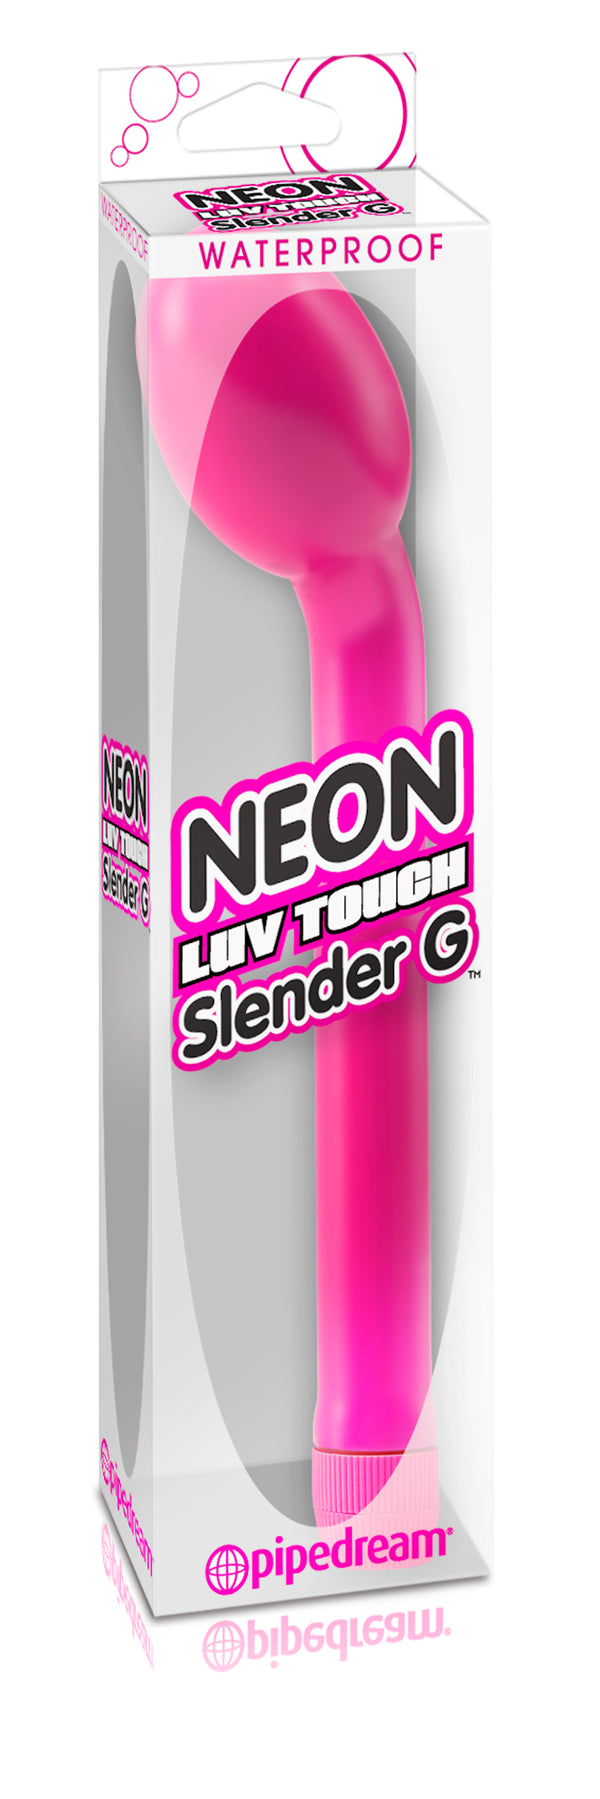 Pipedream Products NEON LUV TOUCH SLENDER G PINK at $19.99